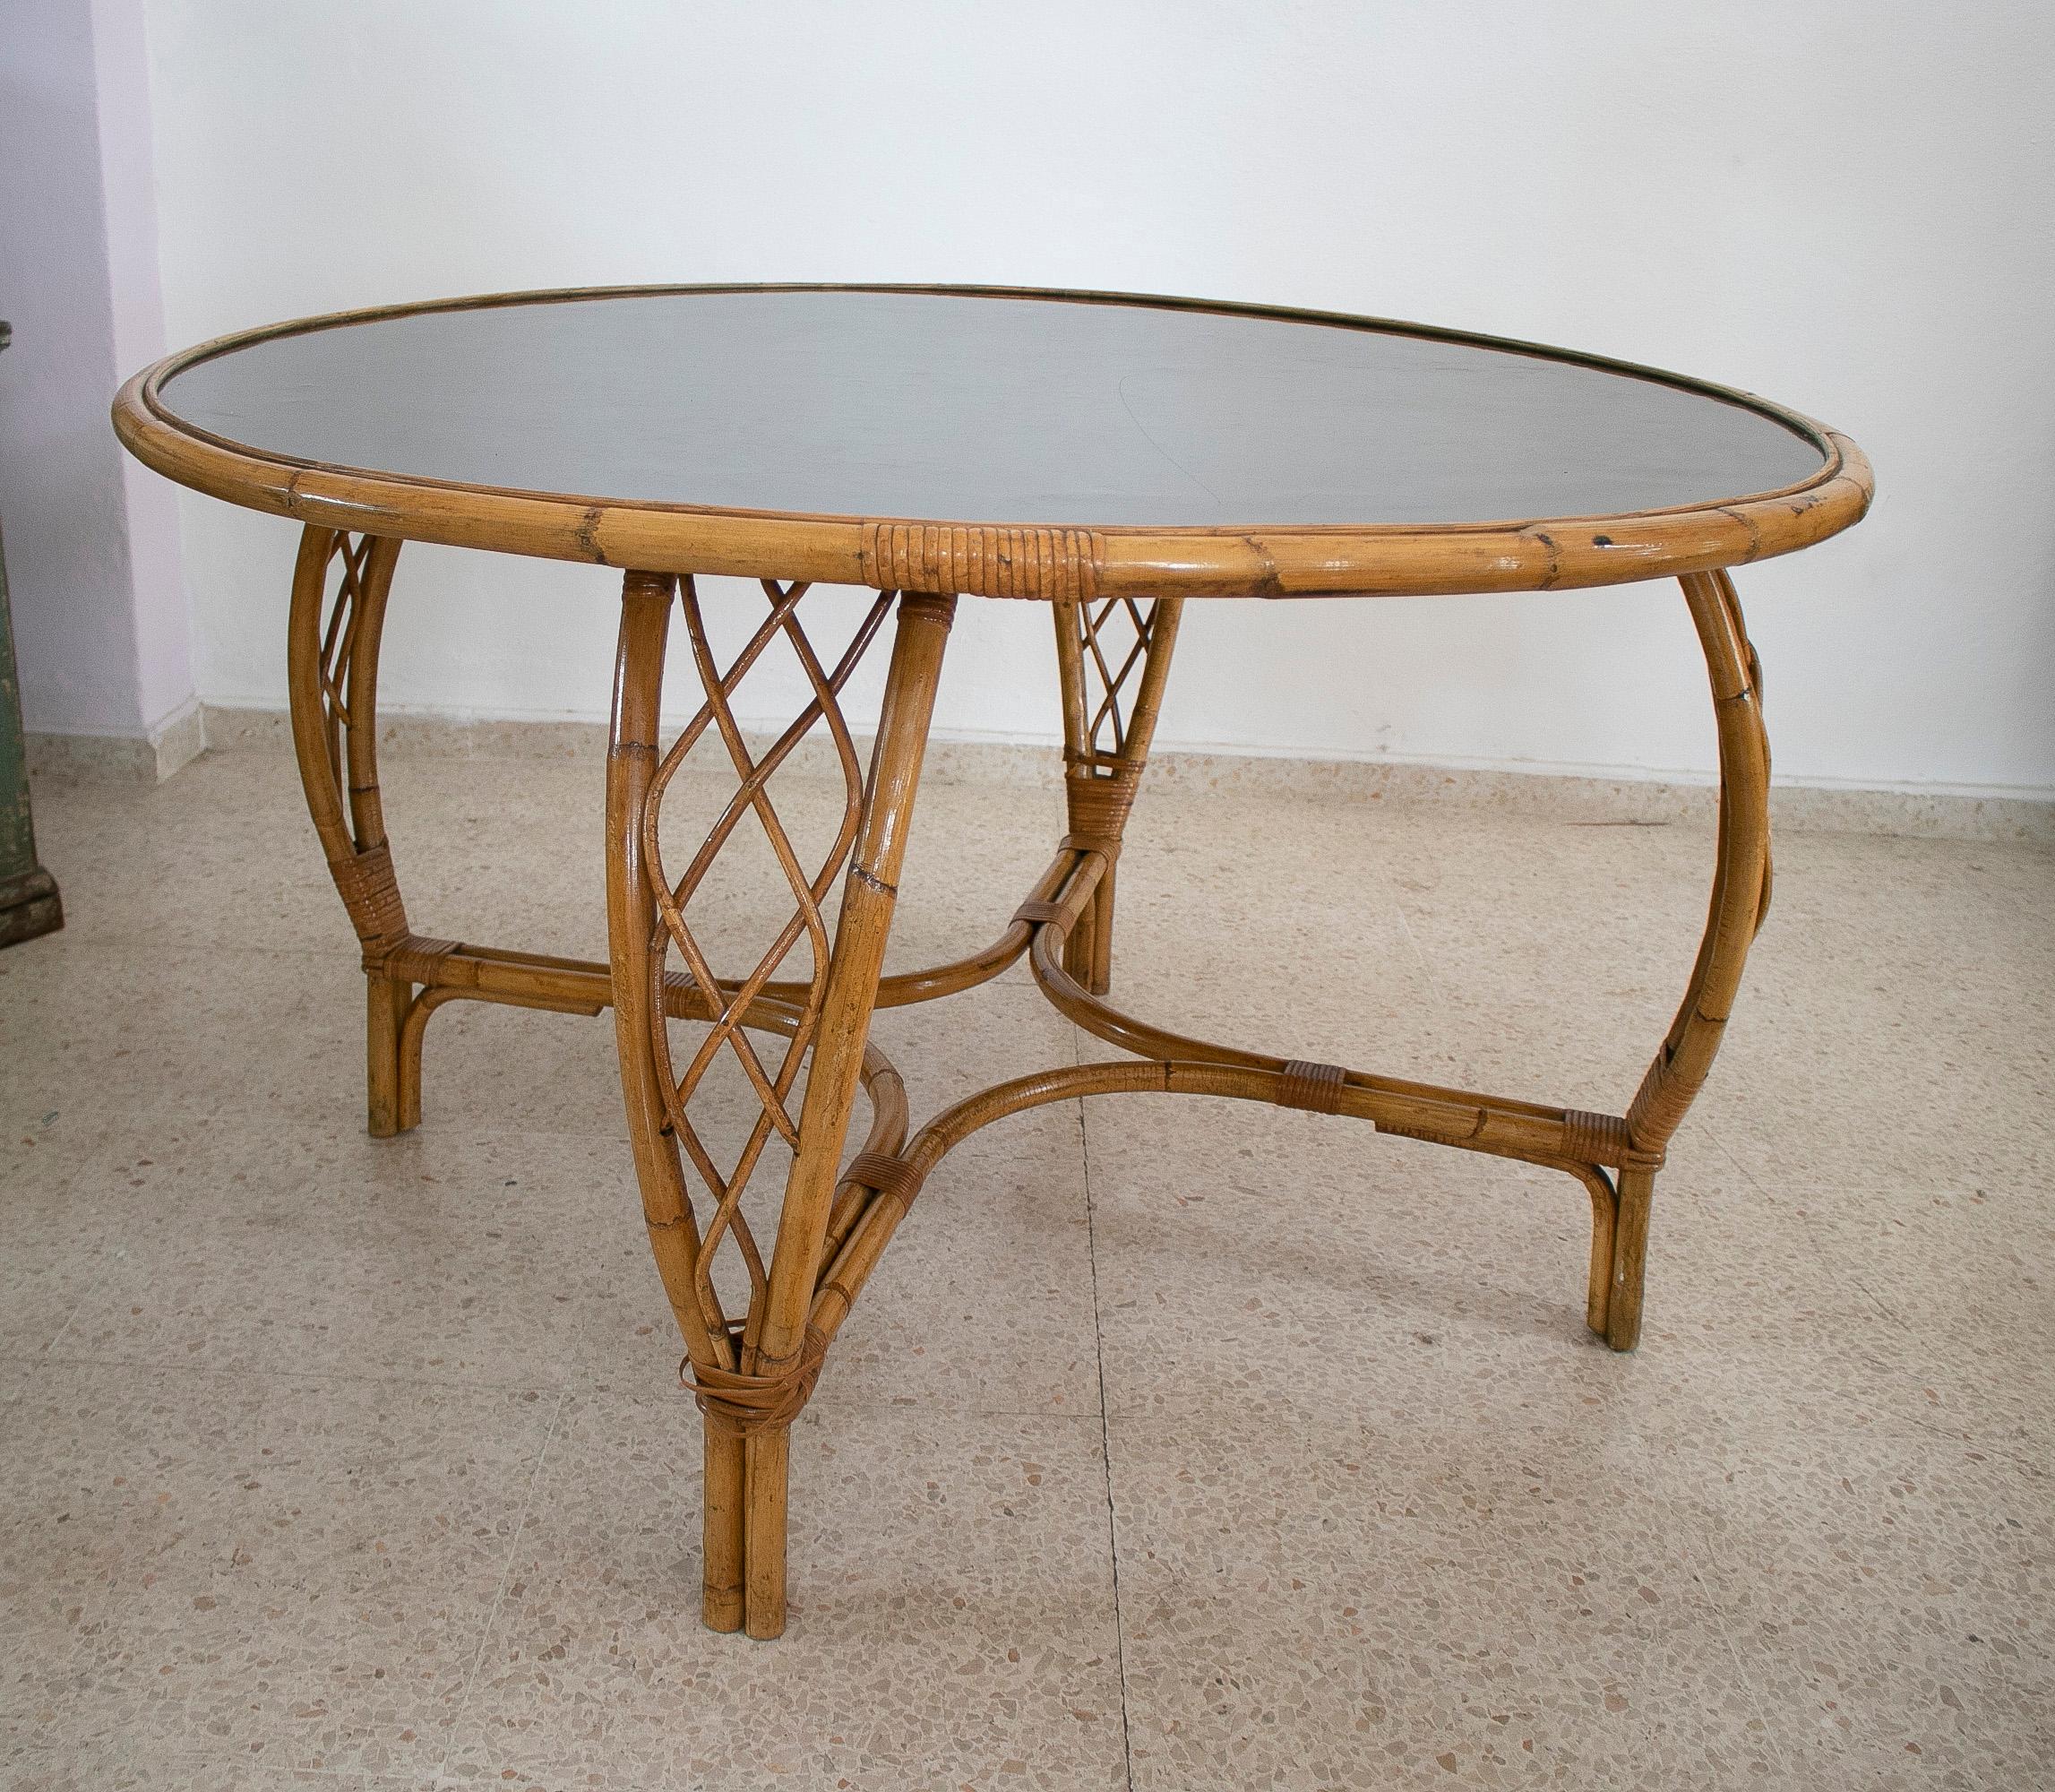 Vintage 1970s Spanish round bamboo table with black Formica top.